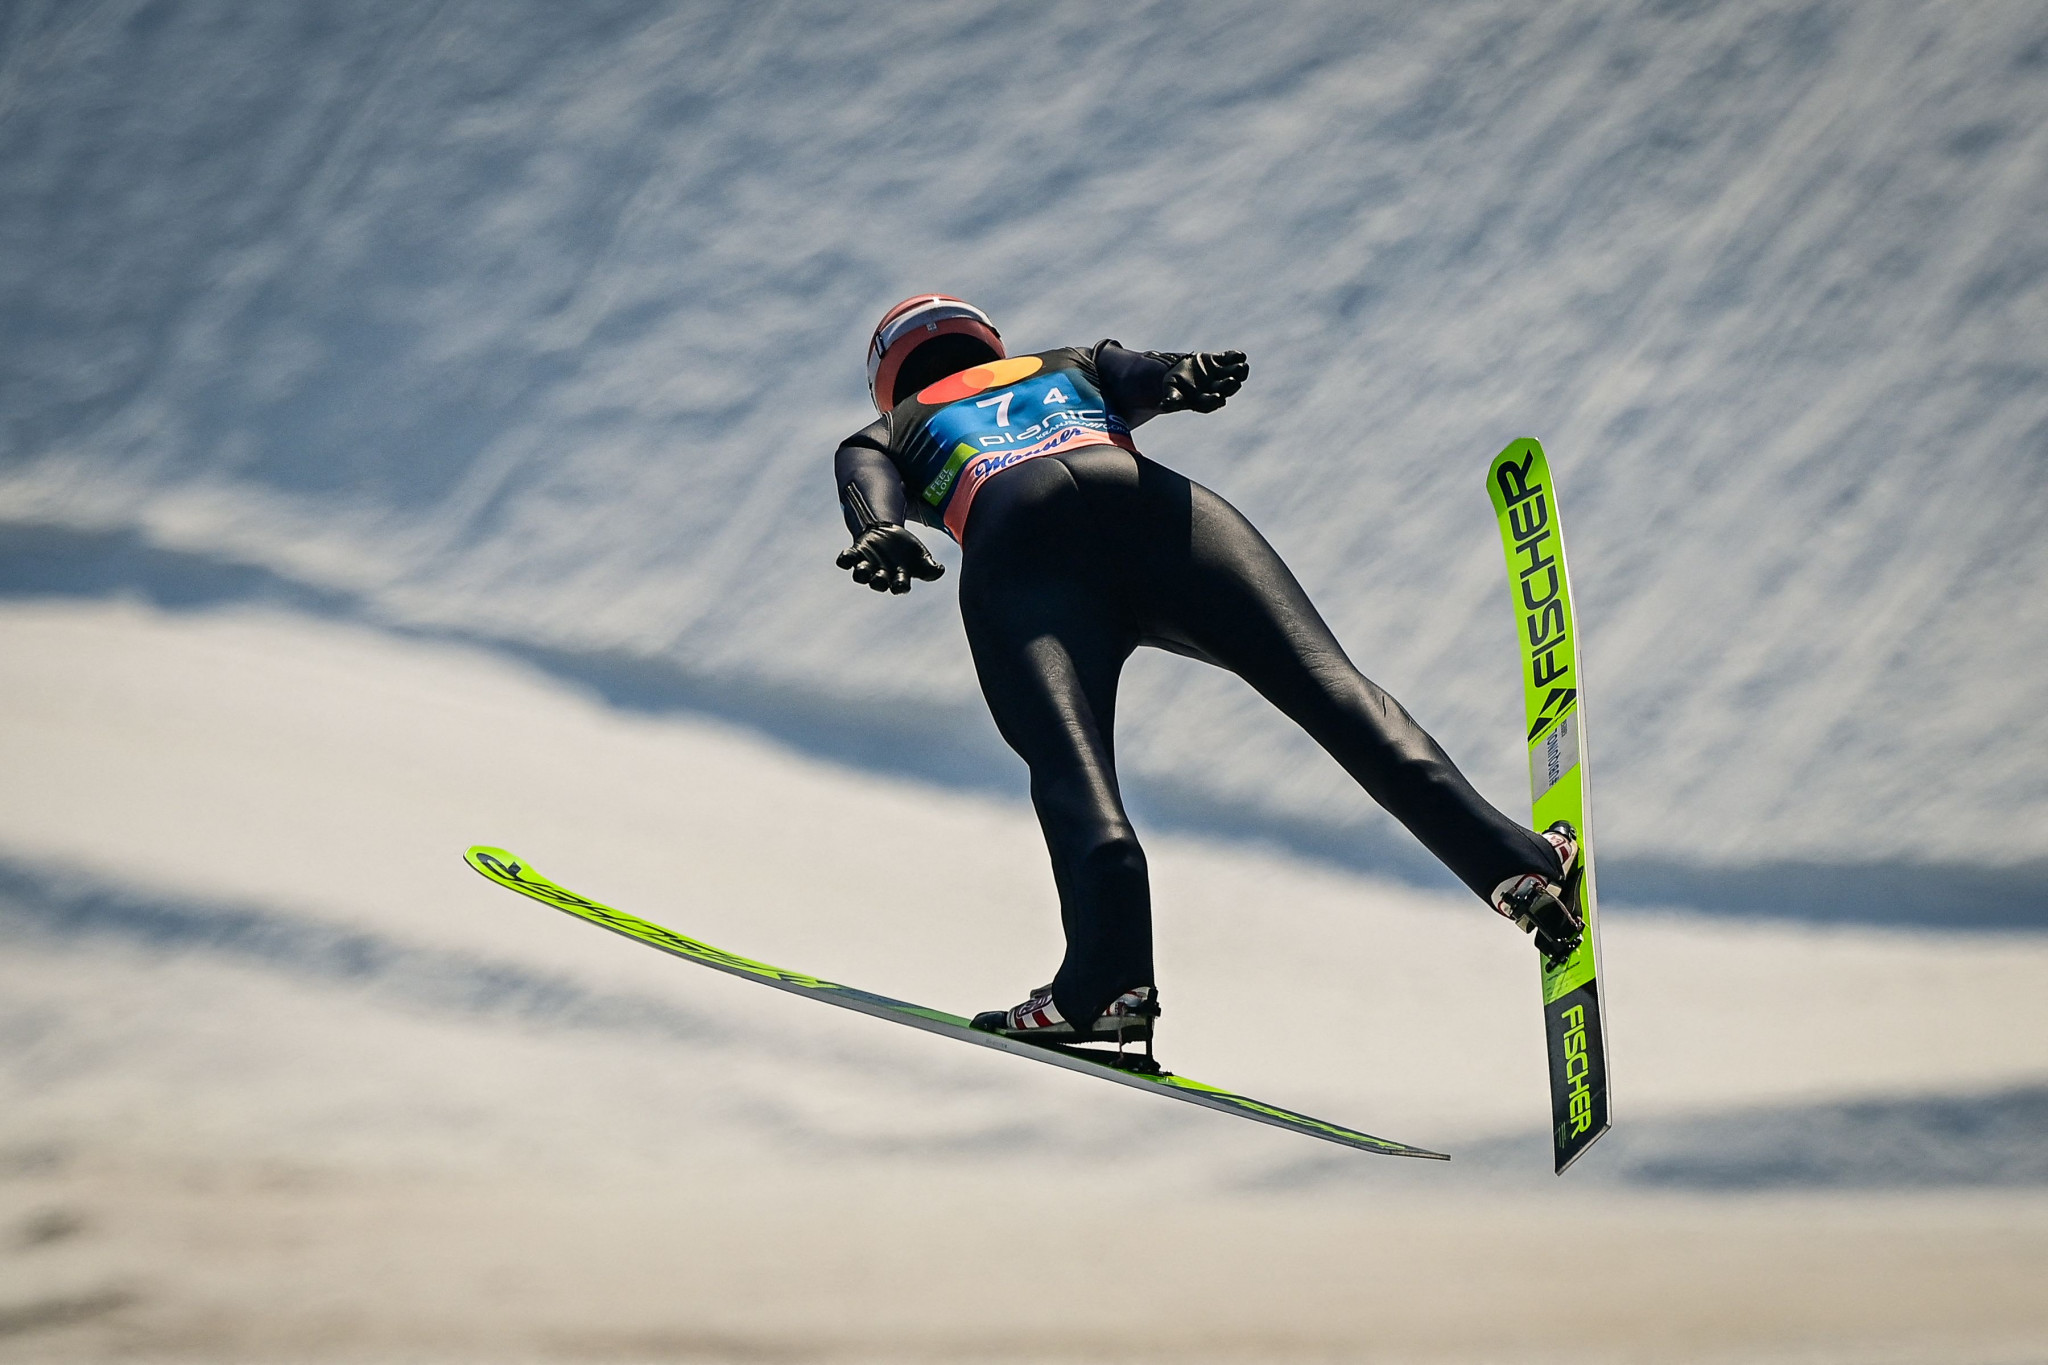 Geiger opens Ski Jumping World Cup season with dominant win in Nizhny Tagil